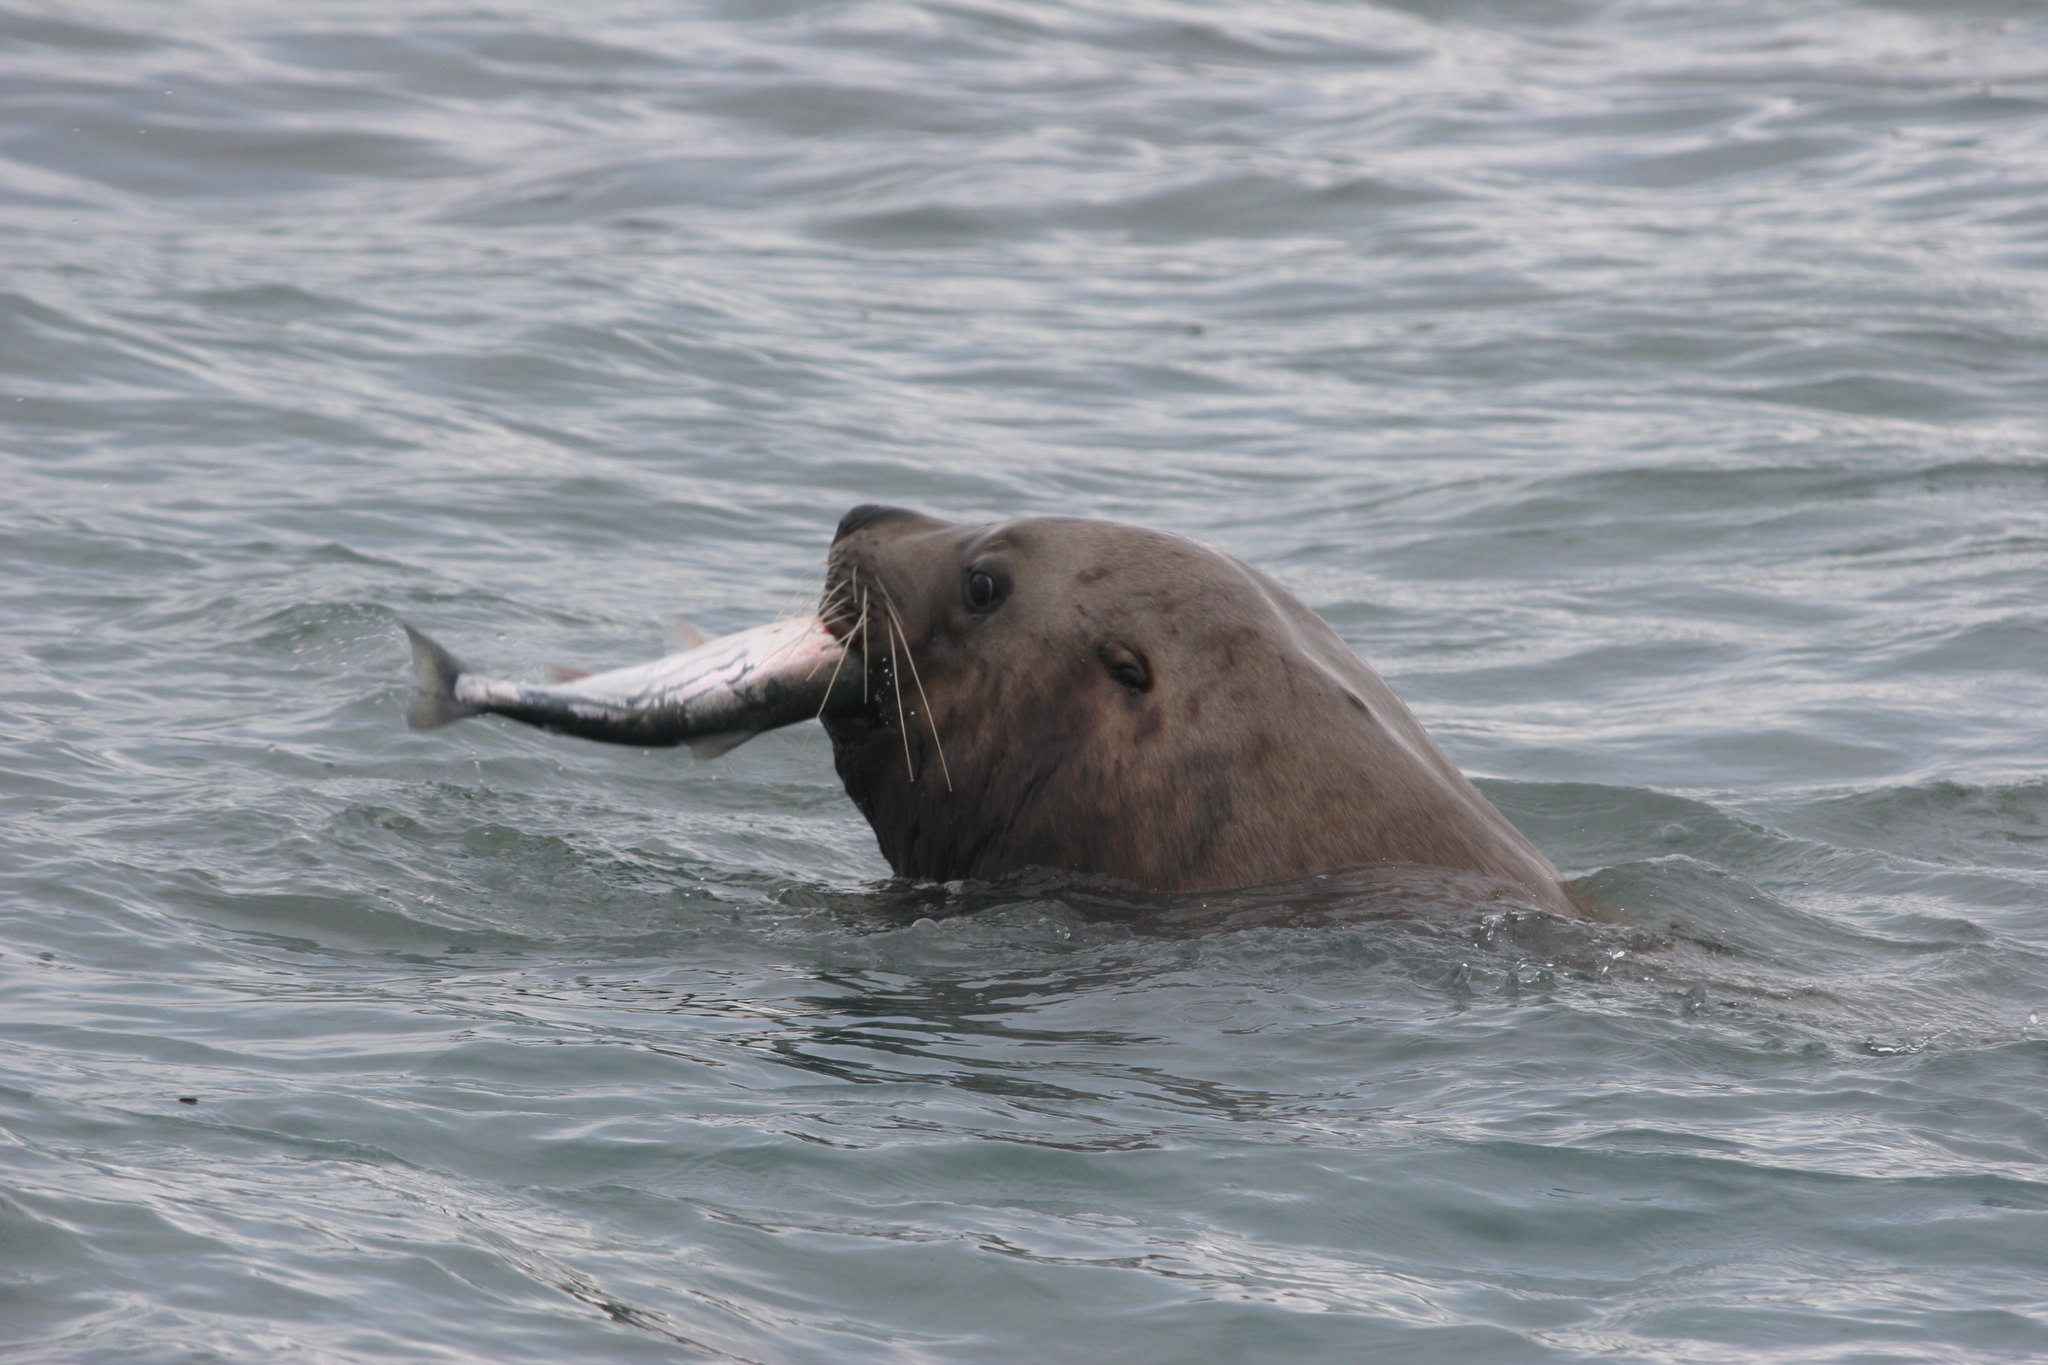 Connecting western science and Indigenous Knowledge from communities in Russia and Alaska to understand northward expansion by Steller Sea Lions